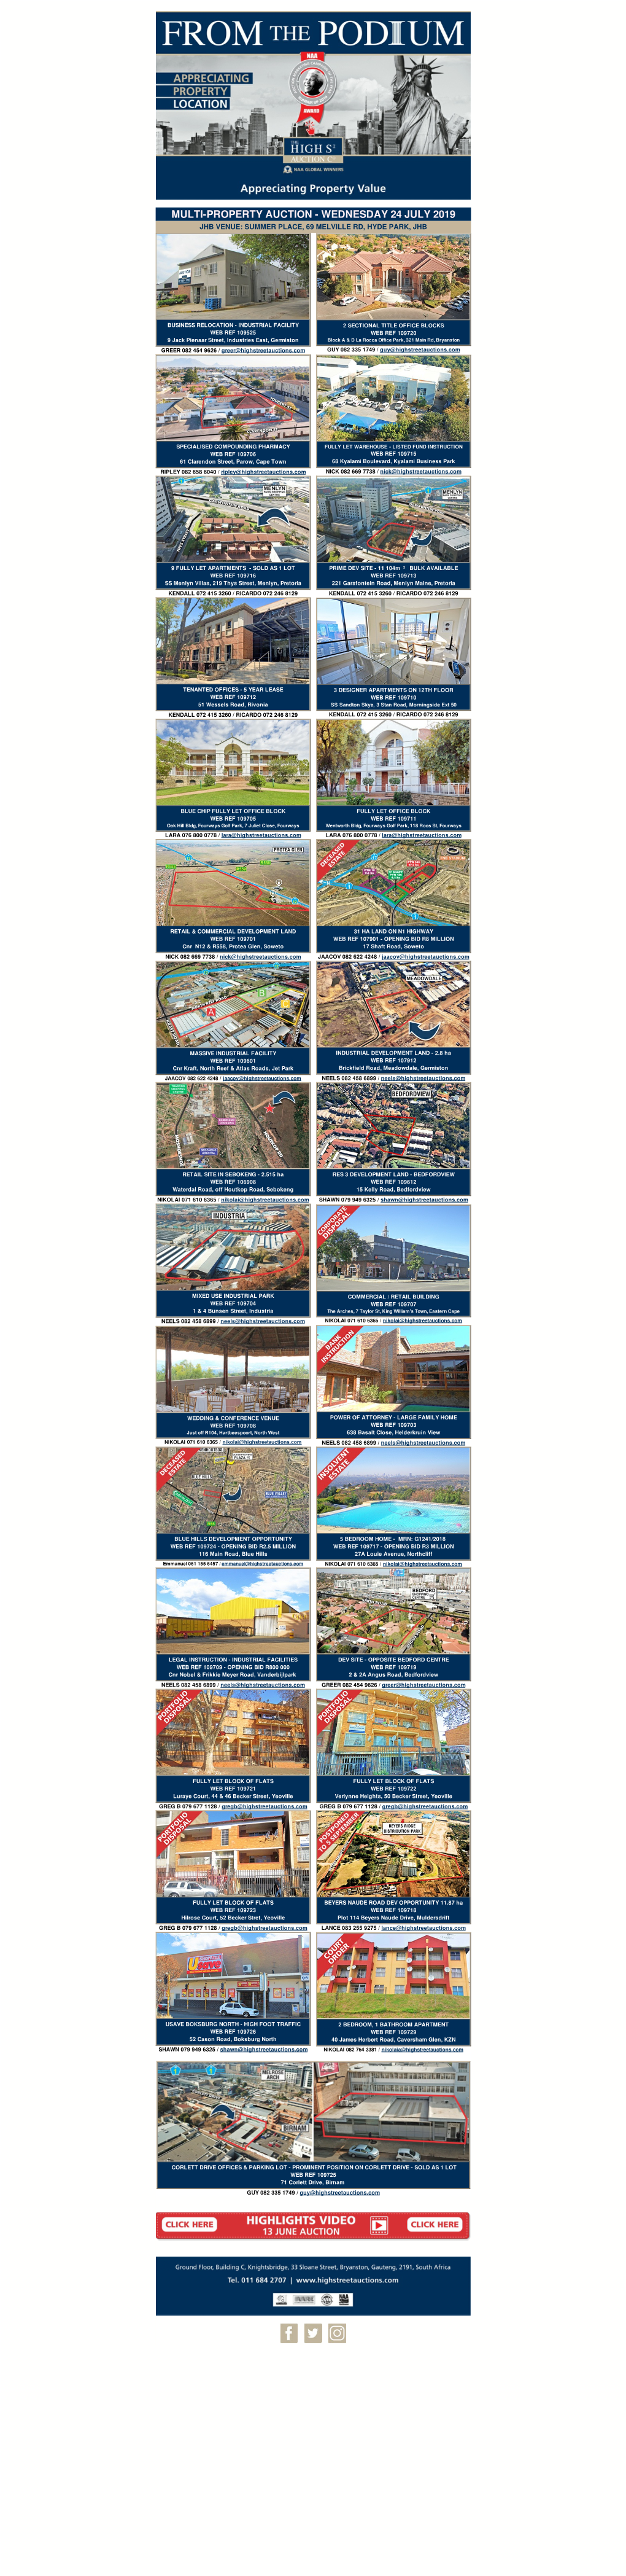 Multi-Property Auction - Wednesday 24 July 2019 Jhb Venue: Summer Place, 69 Melville Rd, Hyde Park, Jhb